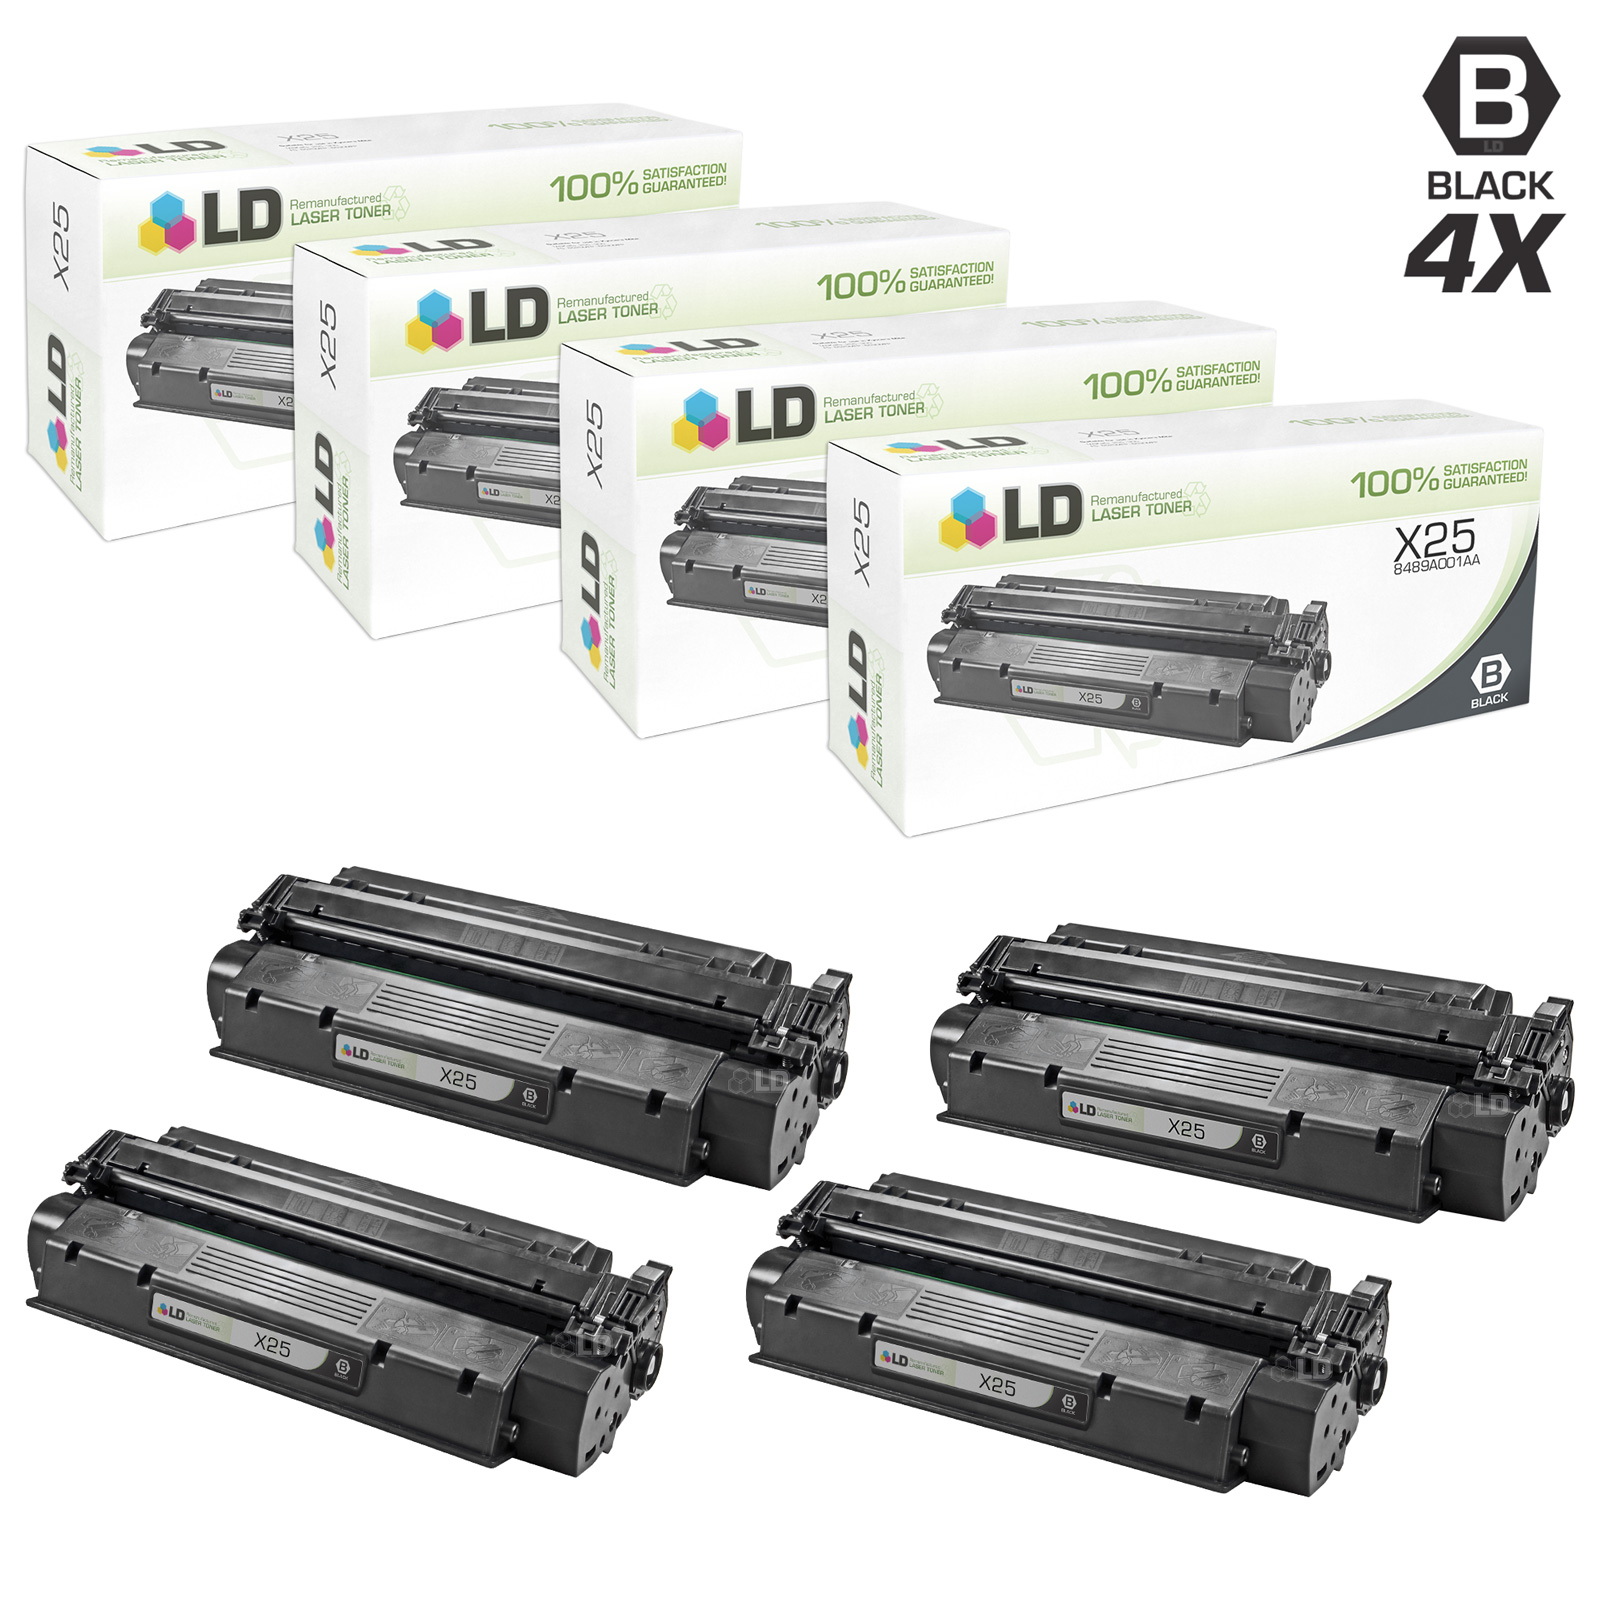 Remanufactured Toner Cartridge Replacement for Canon X25 8489A001AA (Black, 4-Pack) - image 1 of 6